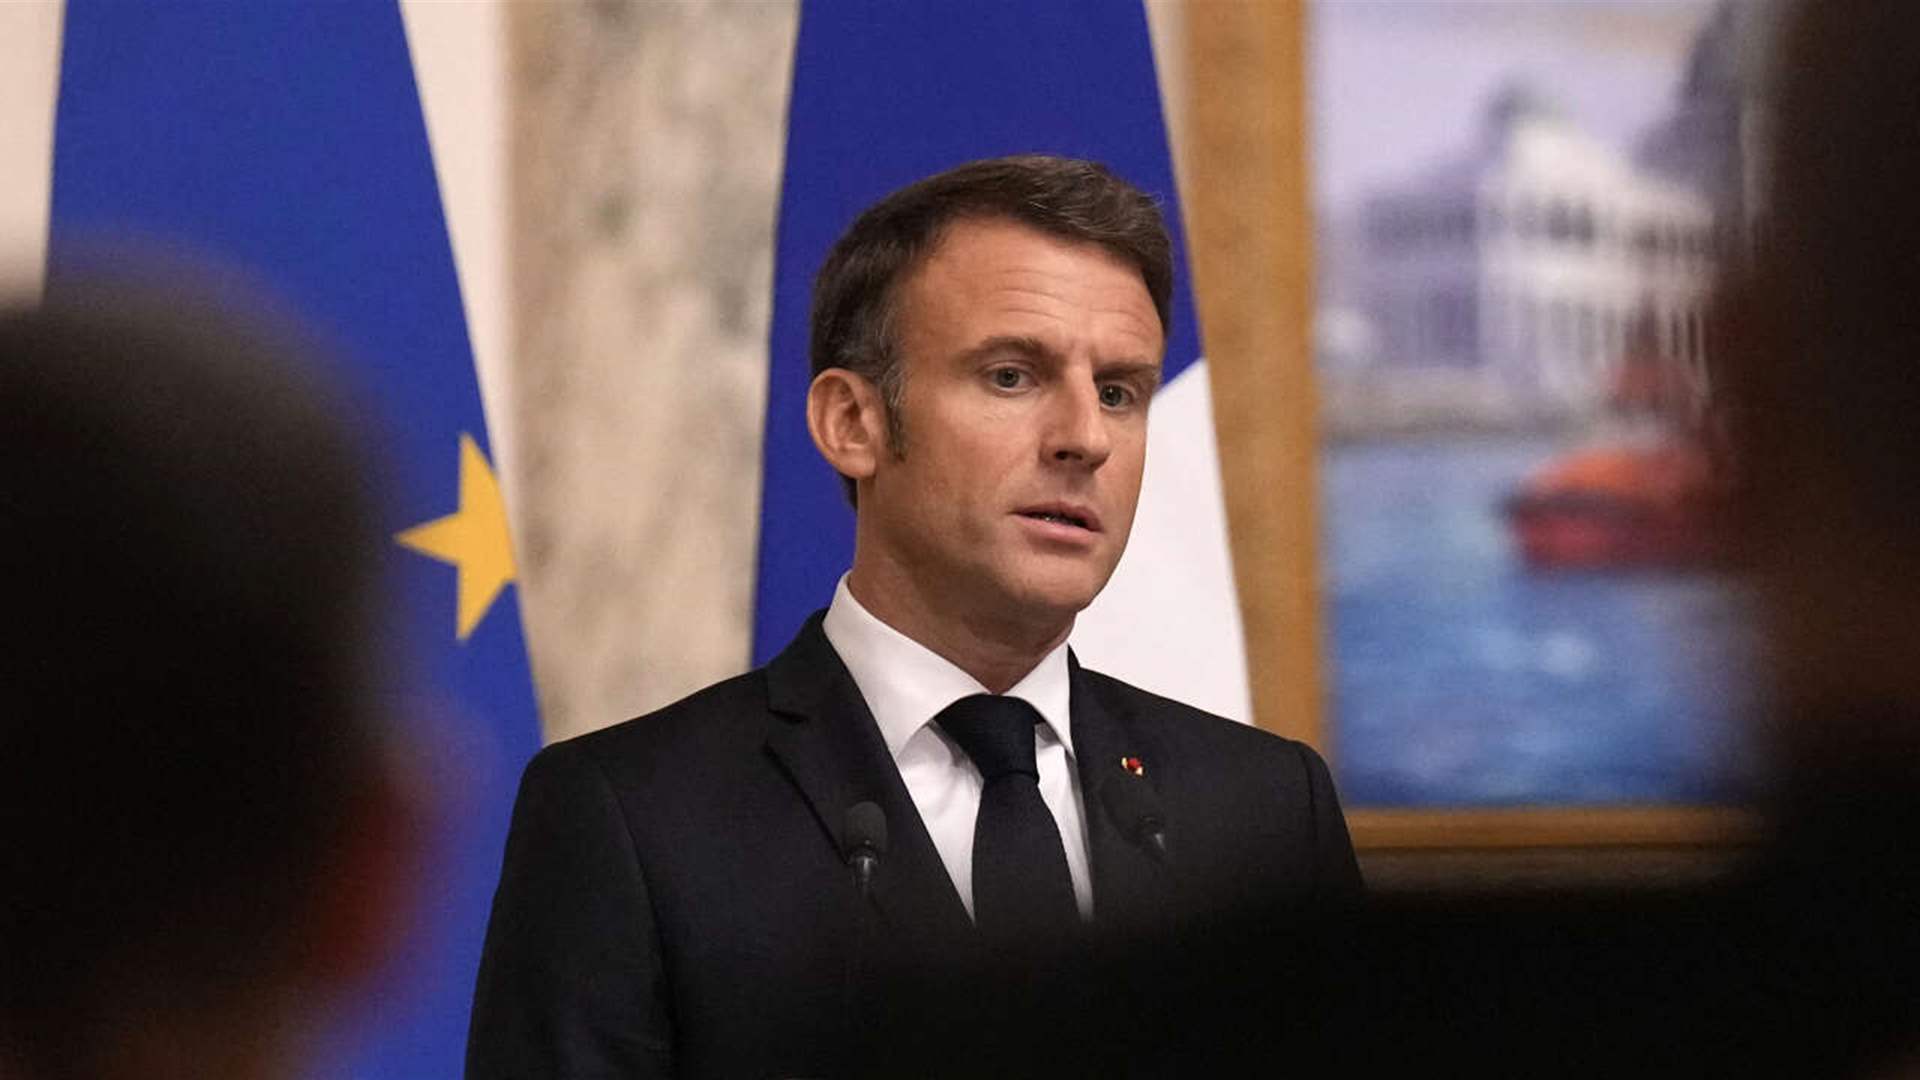 Macron: ‘We must work to achieve a ceasefire’ between Israel and Hamas 